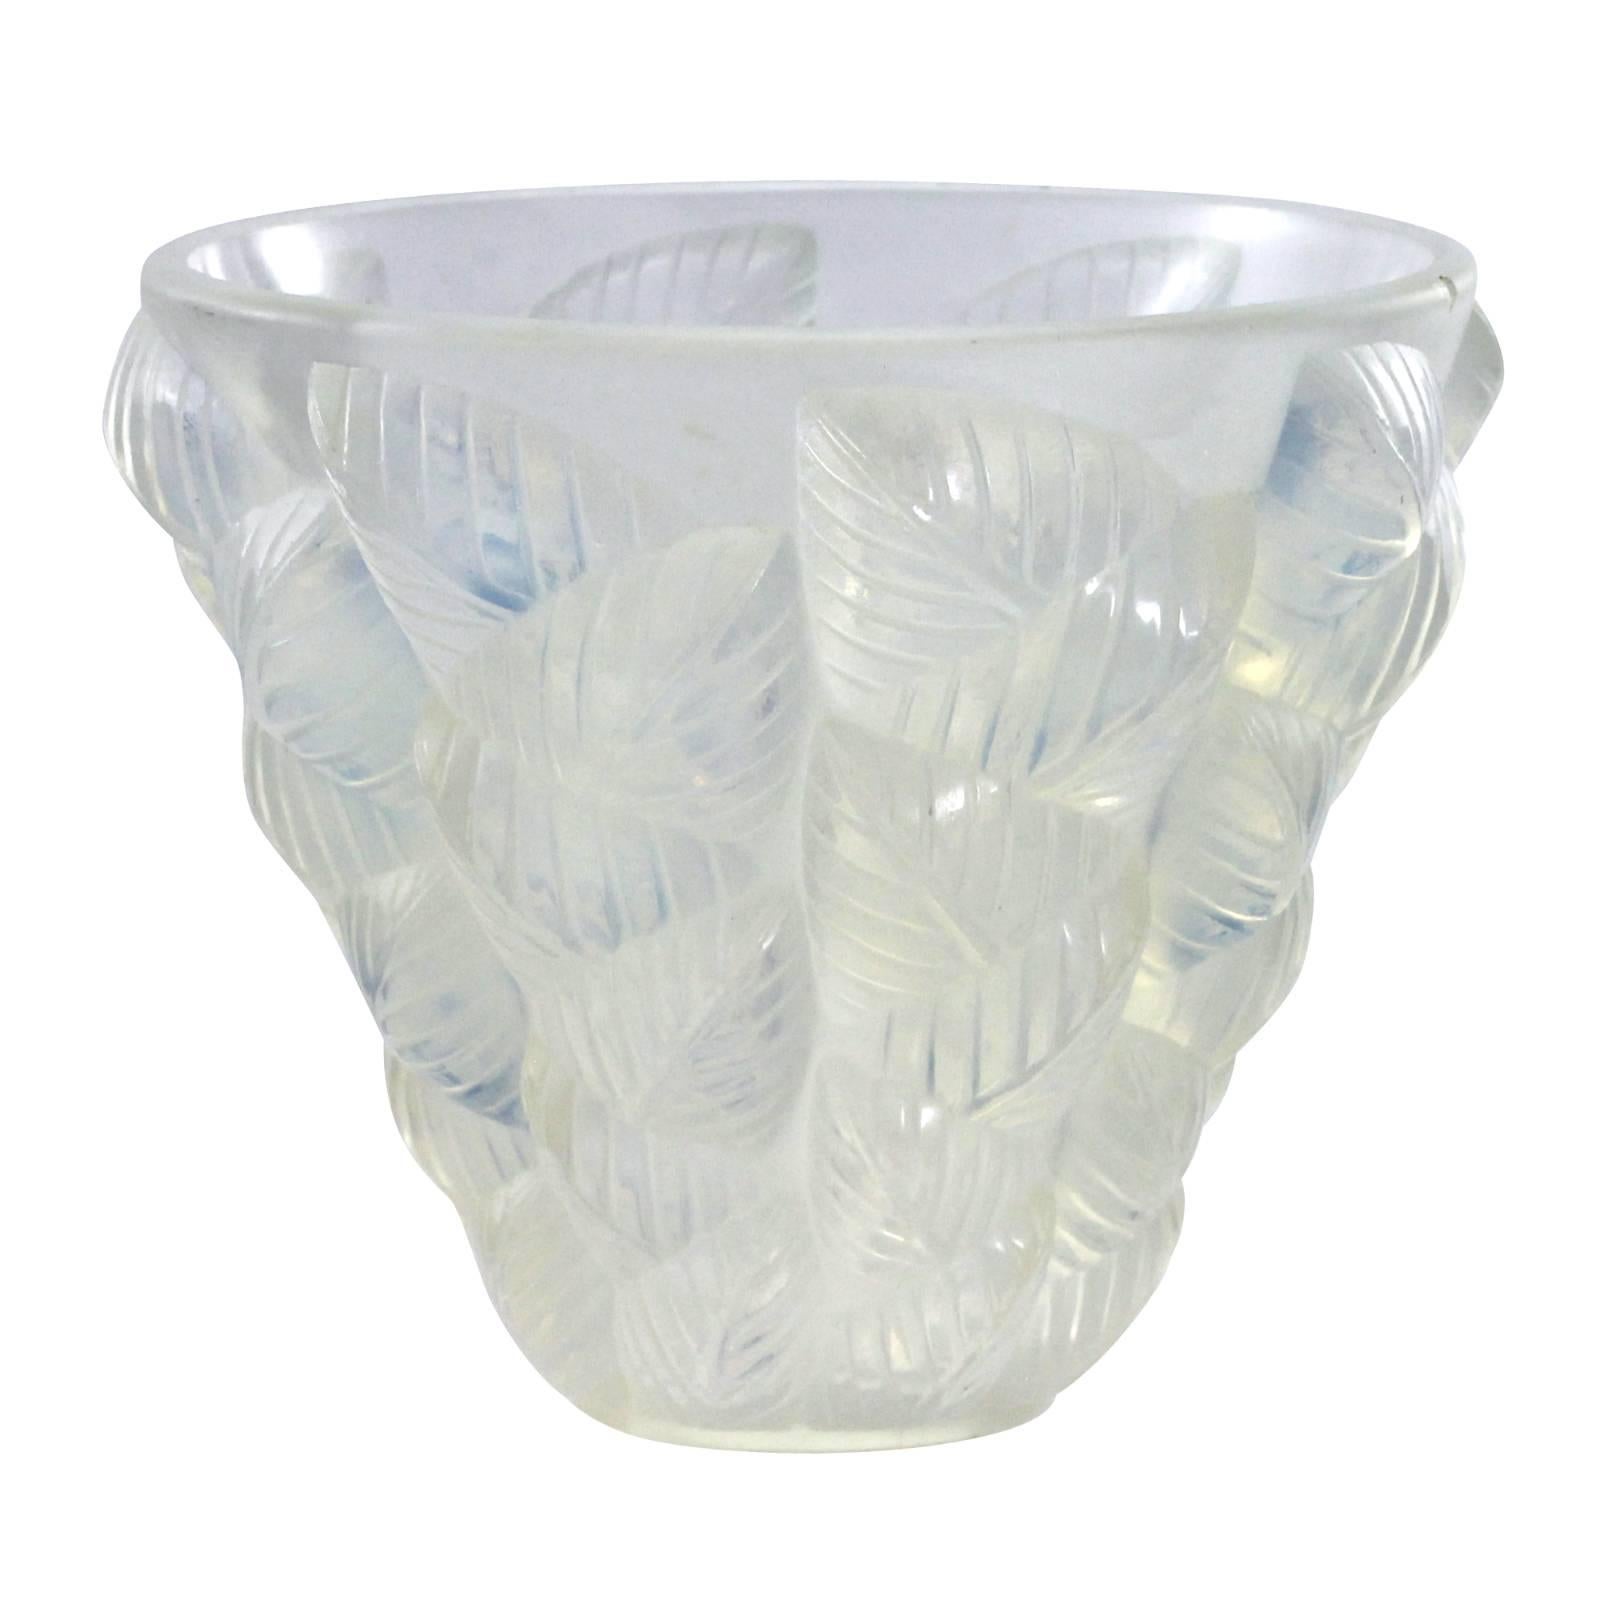 Early 20th Century Art Deco 'Moissac' Opalescent Glass Vase by René Lalique In Excellent Condition For Sale In Brisbane, Queensland